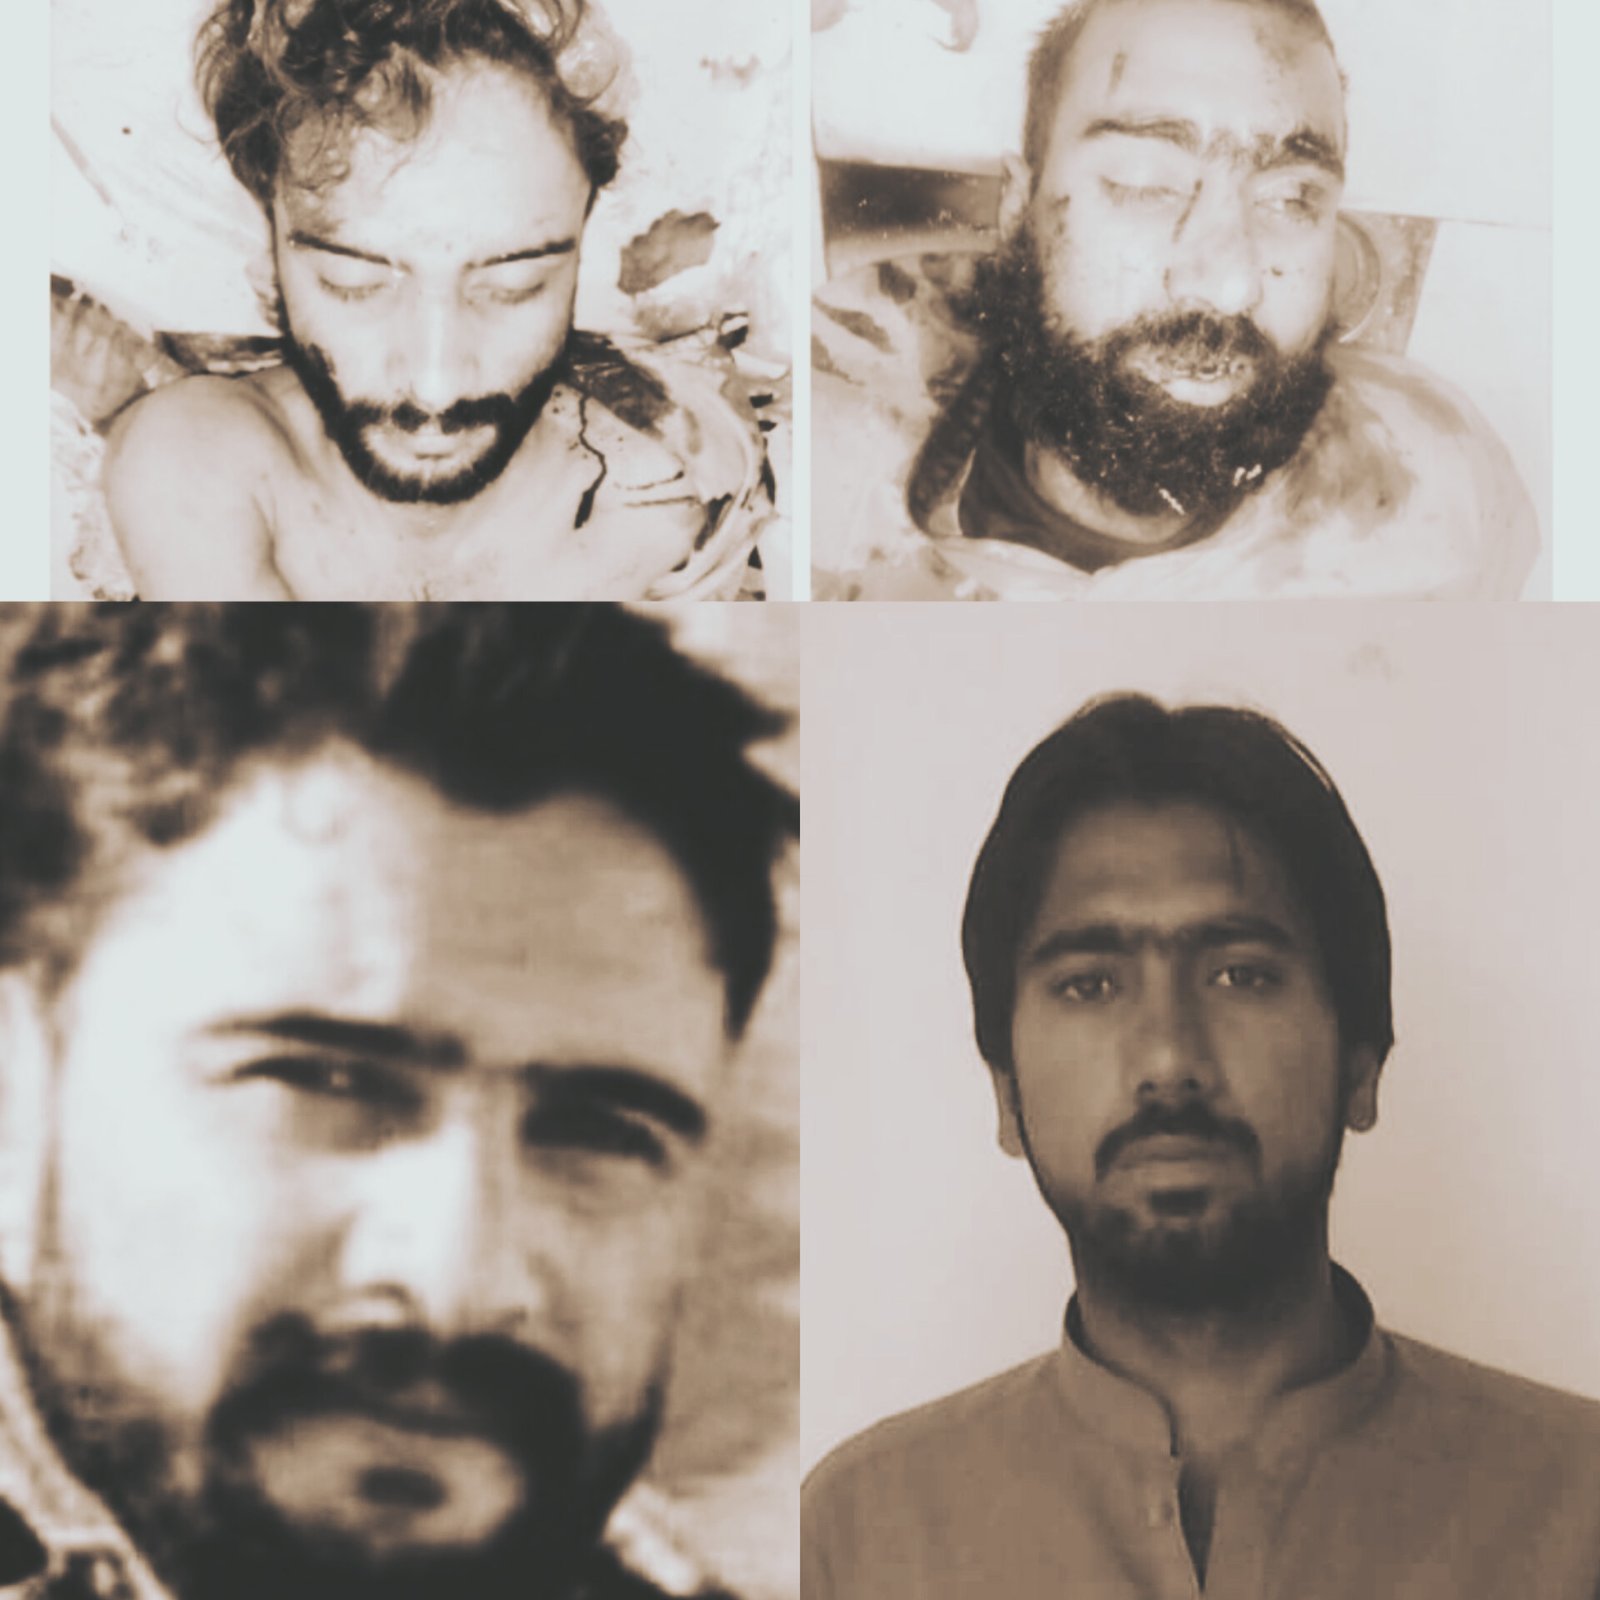 ’CTD’ kills two Forcibly disappeared Baloch youth in a fake encounter" | Zrumbesh